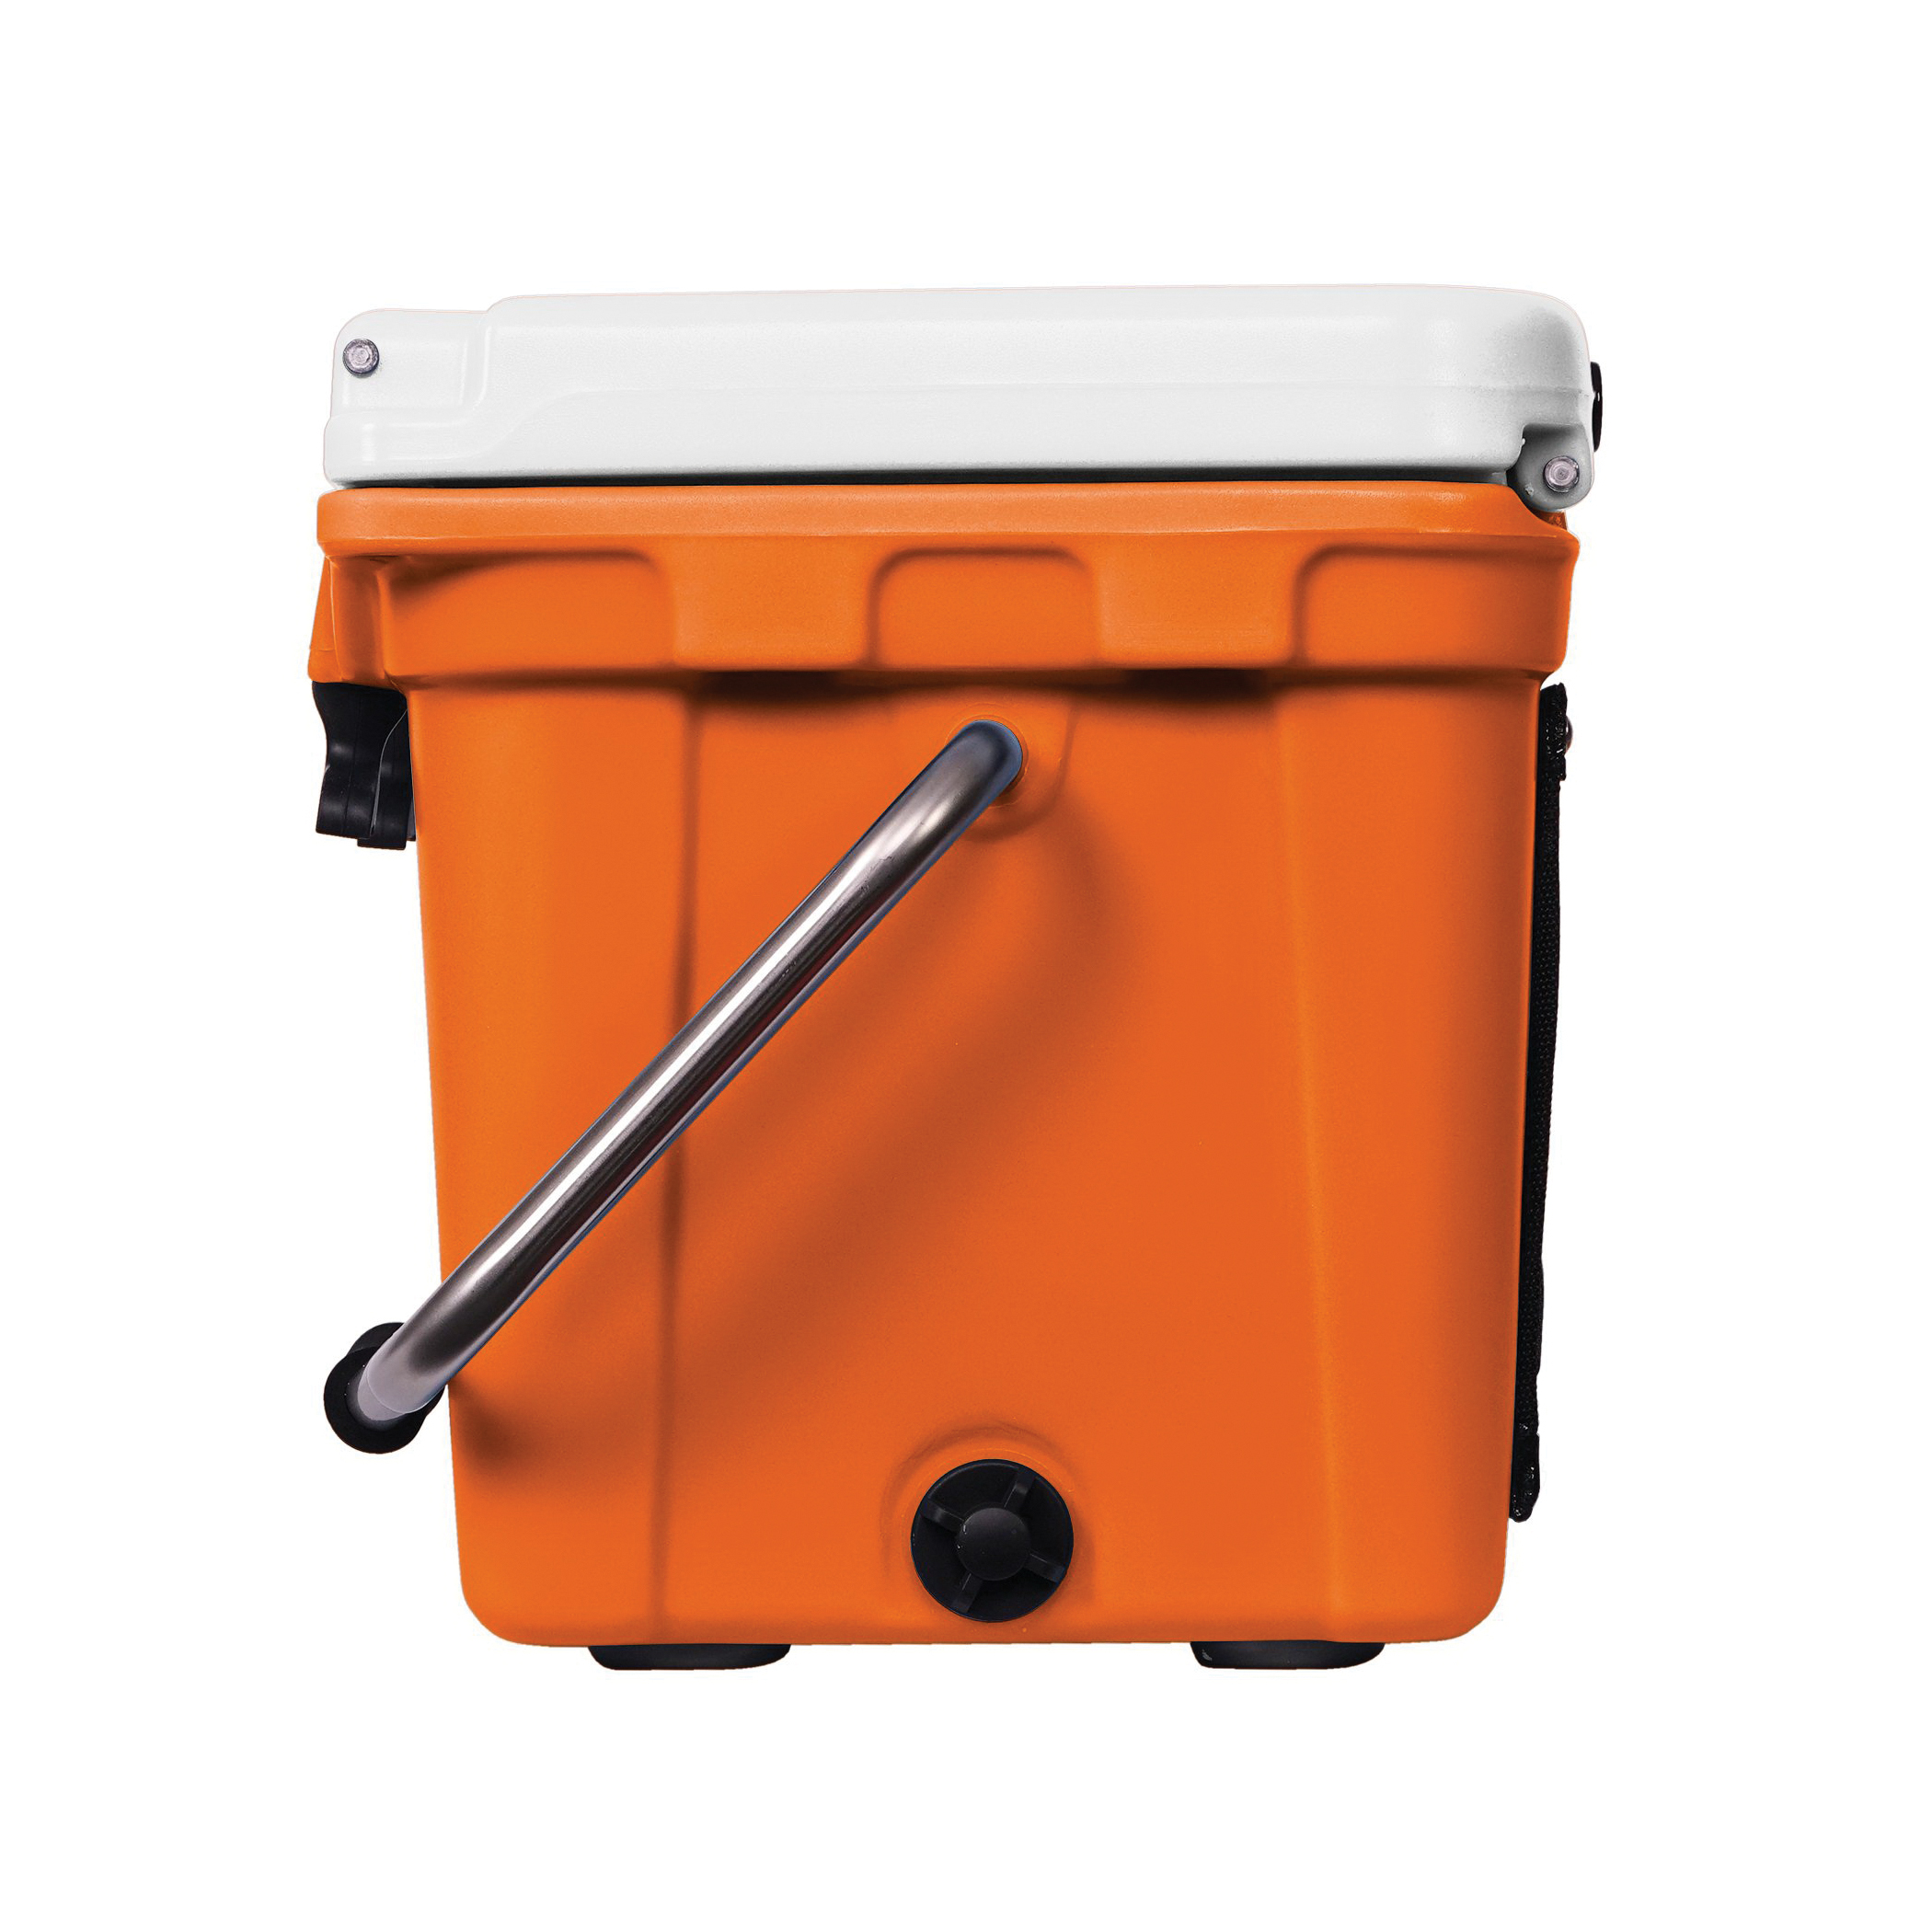 ORCA ORCBO/WH020 Cooler, 20 qt Capacity, Orange/White - 3